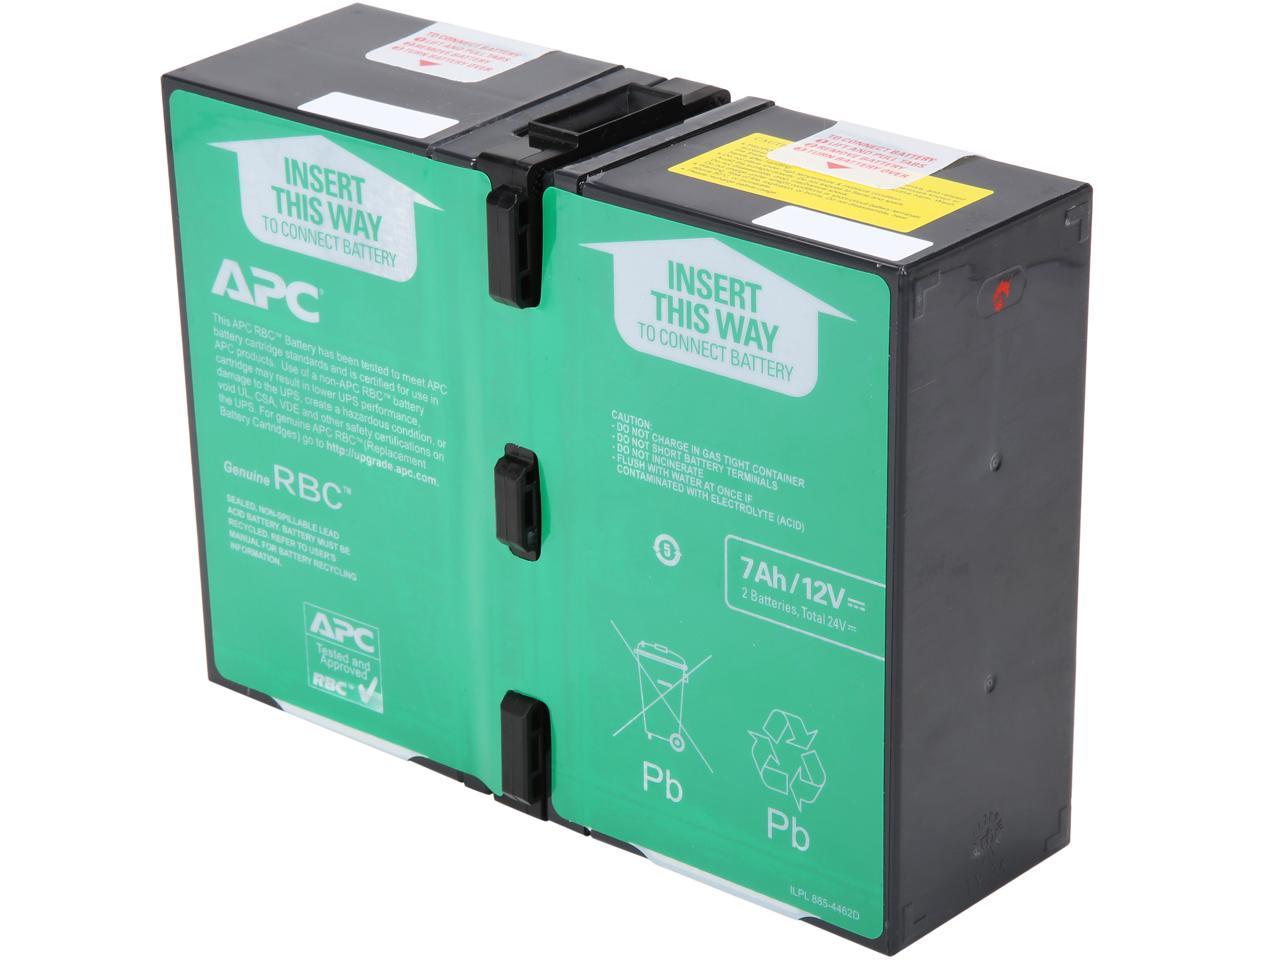 APC UPS Battery Replacement for APC UPS Model BR1000G, BX1350M, BN1350G, BR900GI, BX1000G, BX1300G, SMT750RM2U, SMT750RM2UC, SMT750RM2UNC, and select others (APCRBC123) - image 1 of 2